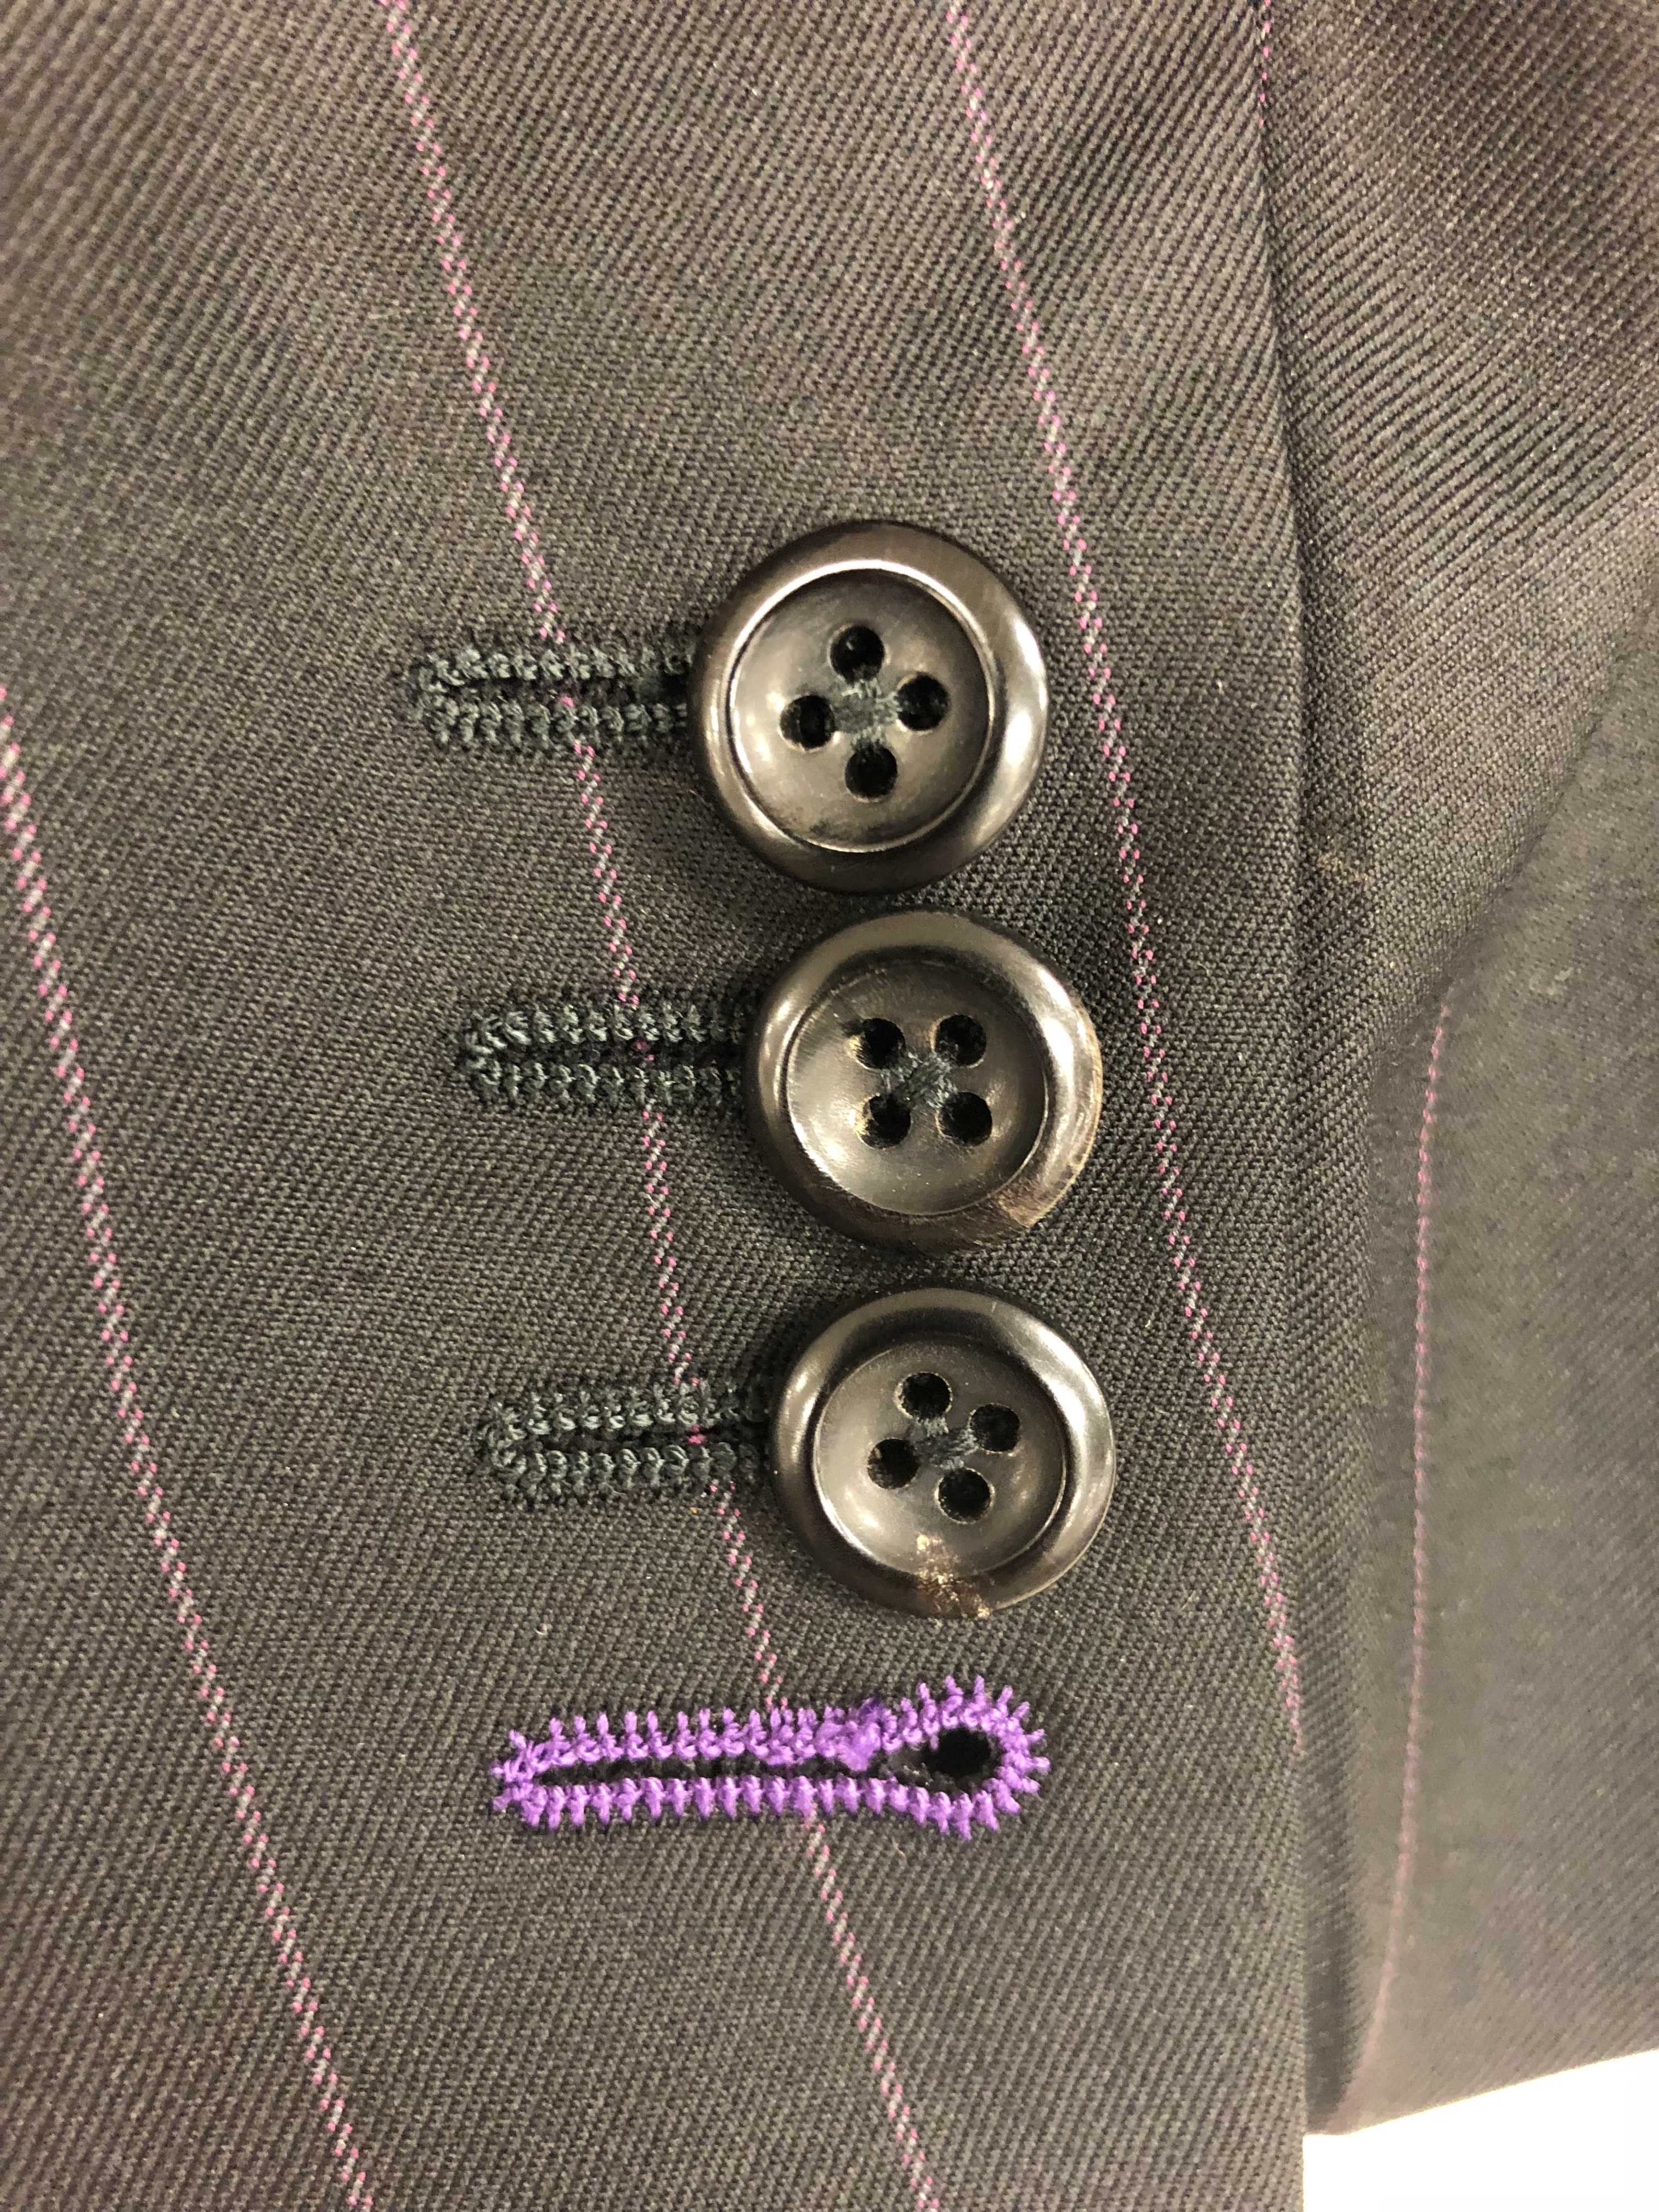 www.theGenuineGentleman.com Suit Quality Hallmarks - Suit Working Cuff Button Hole Contrast Stitching